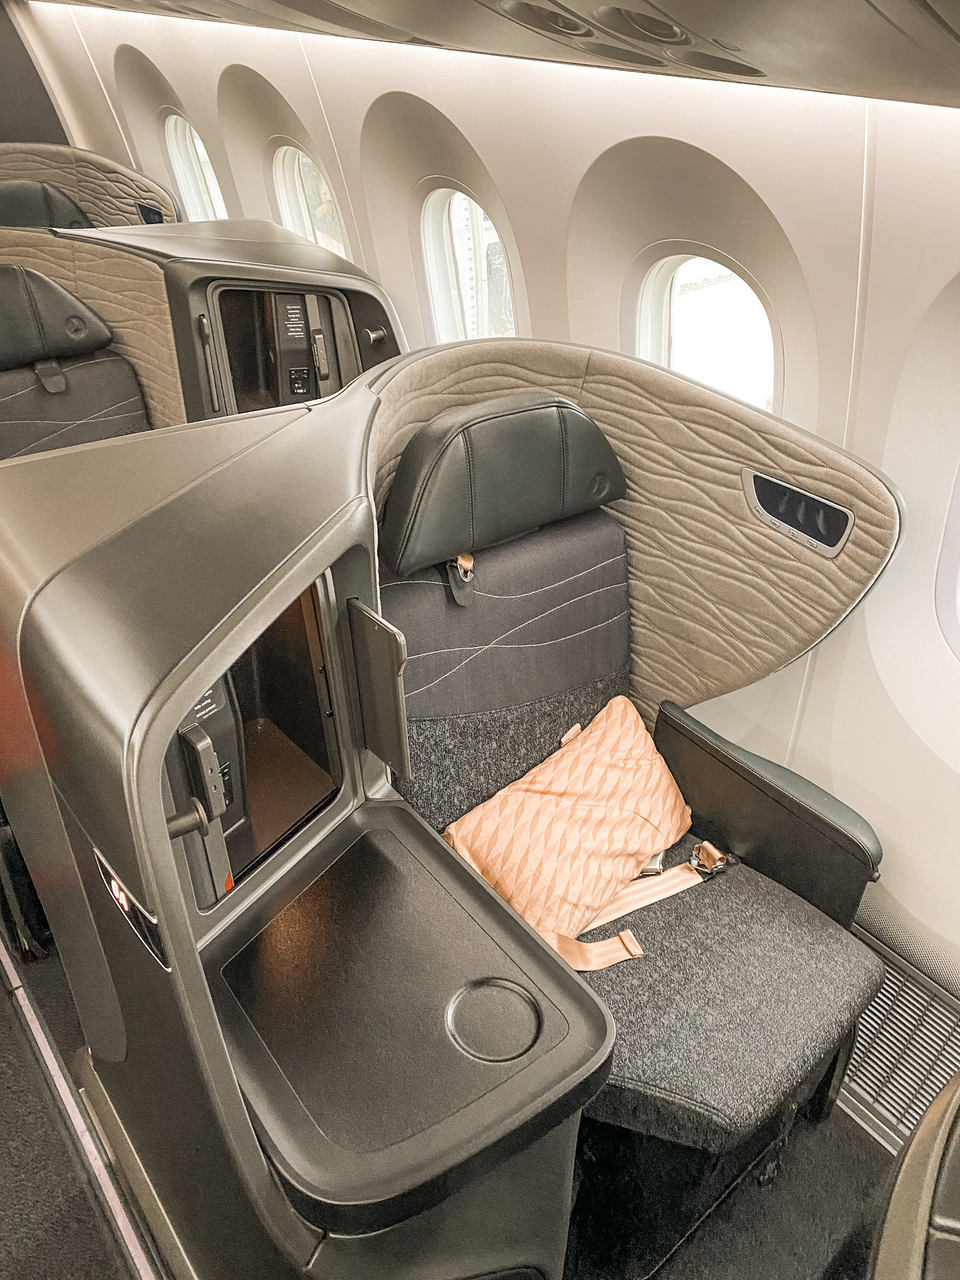 Turkish Airlines Business Class Boeing 787